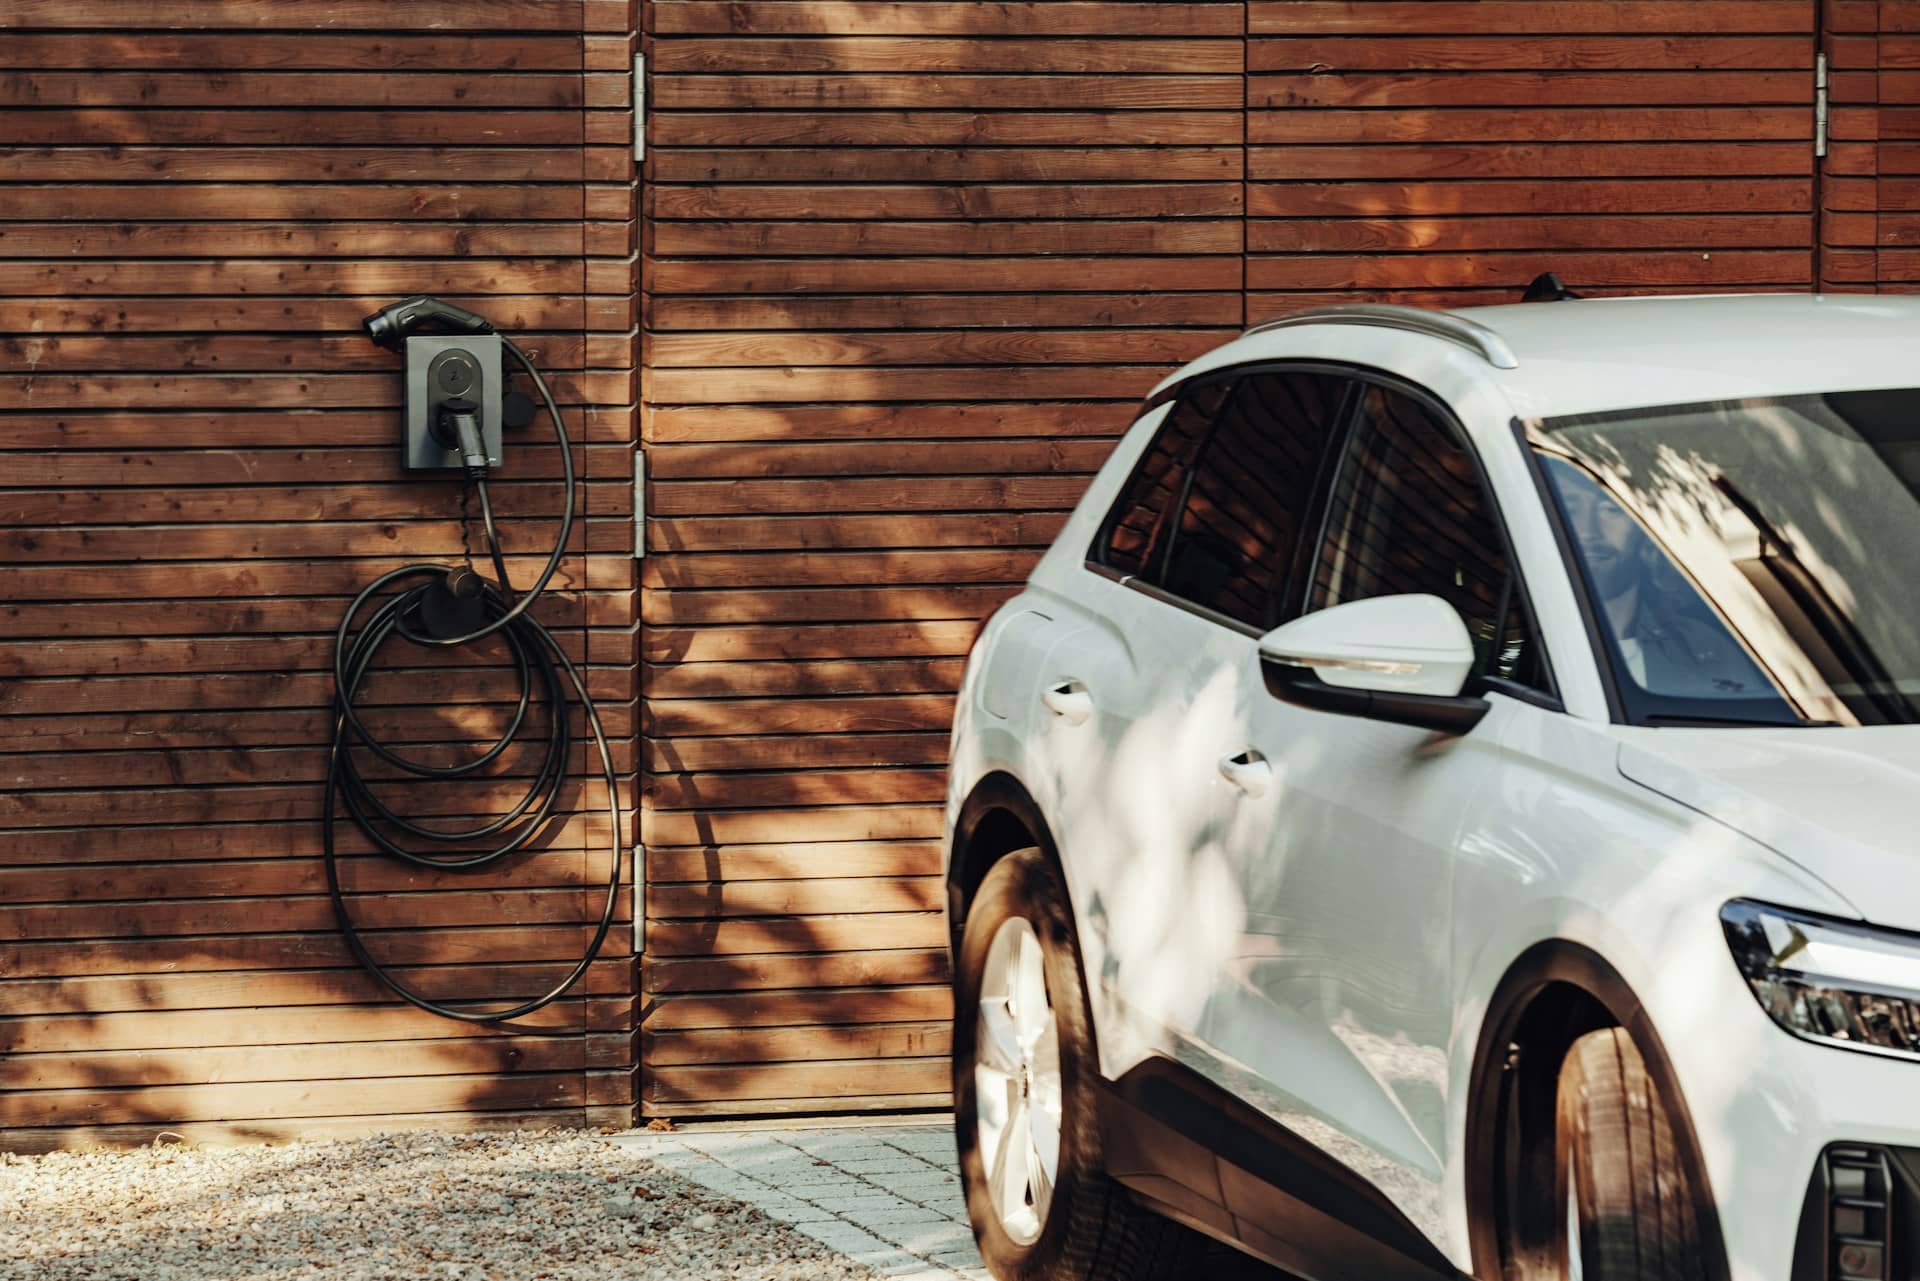 An electric car charging with a wall-mounted charger on a wooden panel.